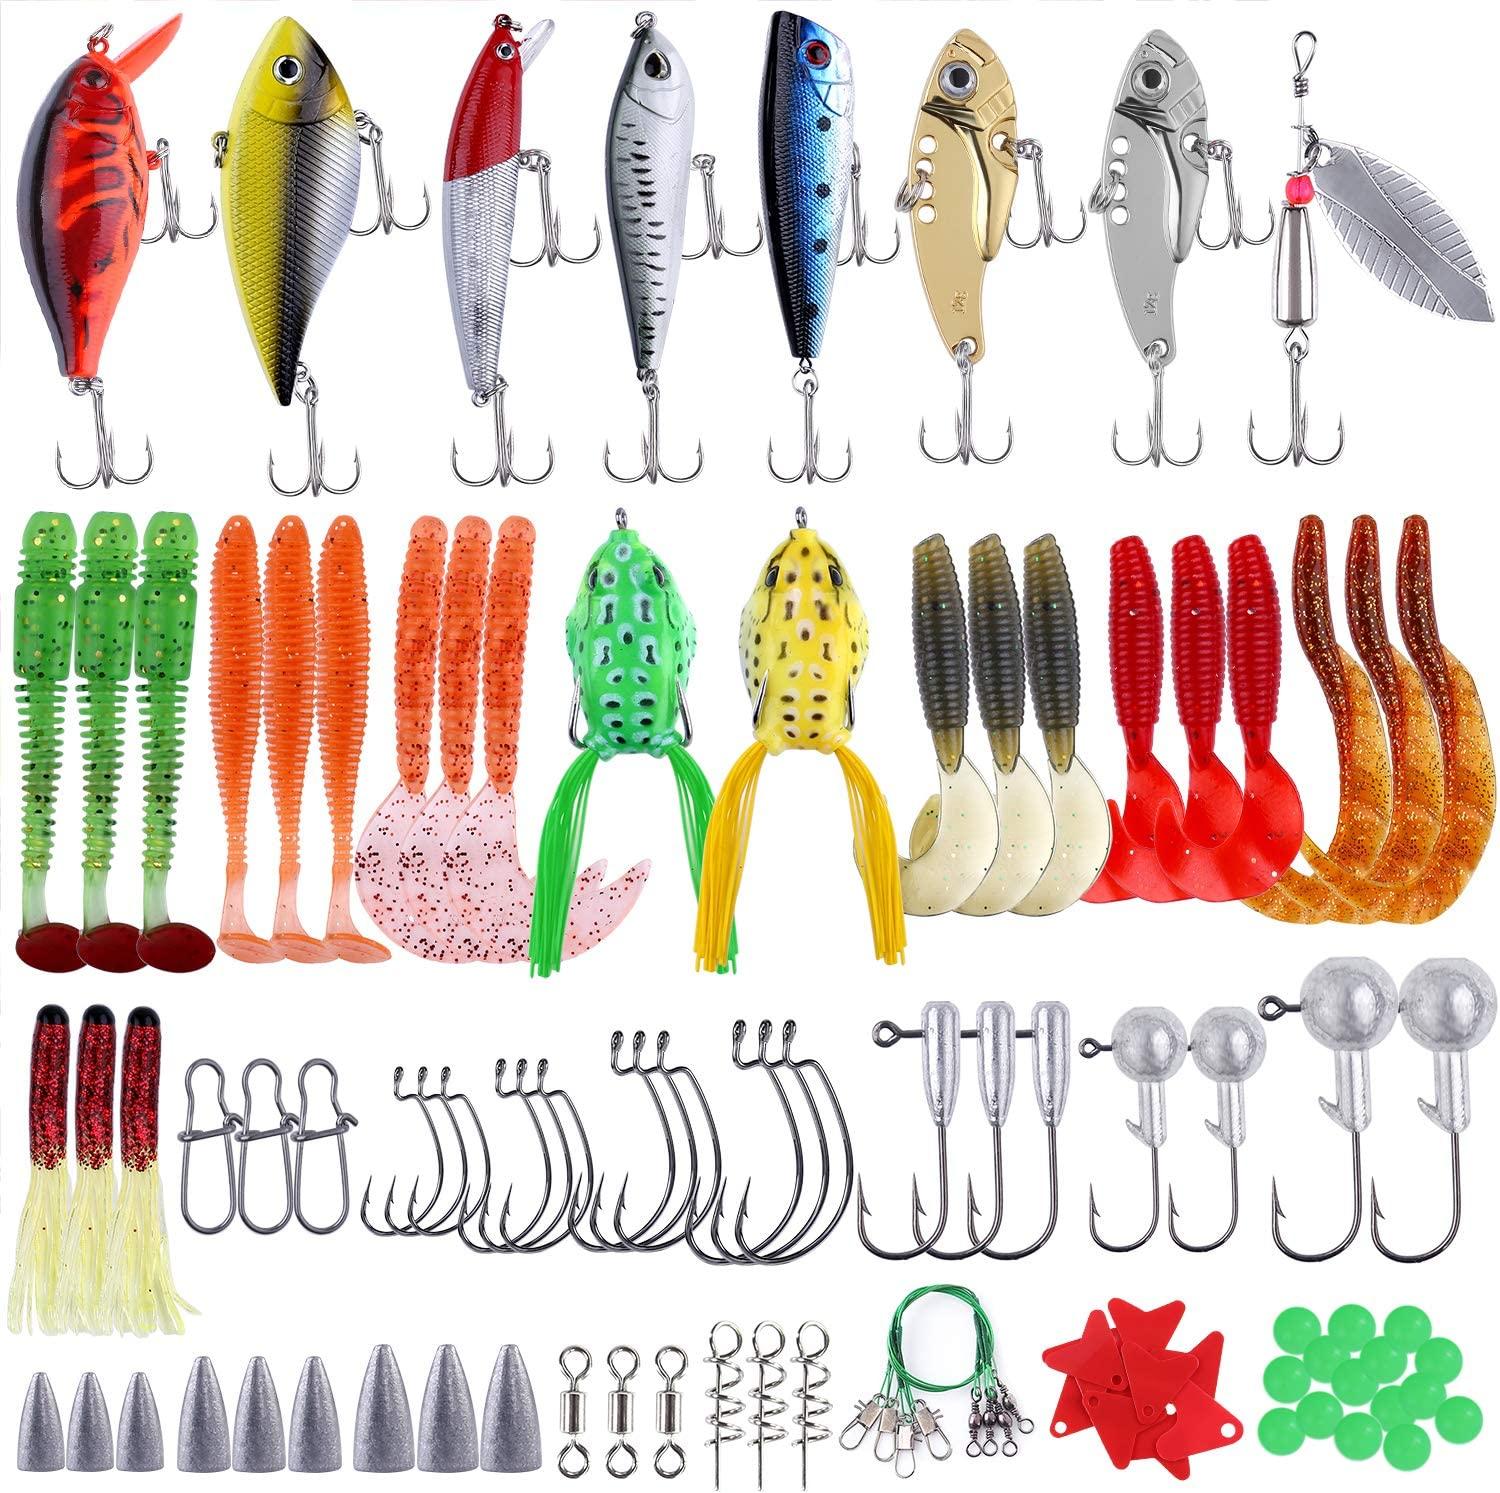 PLUSINNO Fishing Lures Baits Tackle Including Crankbaits, Spinnerbaits,  Plastic Worms, Jigs, Topwater Lures, Tackle Box and More Fishing Gear Lures  Kit Set, 210/189Pcs Fishing Lure Tackle 210PCS Fishing Lure